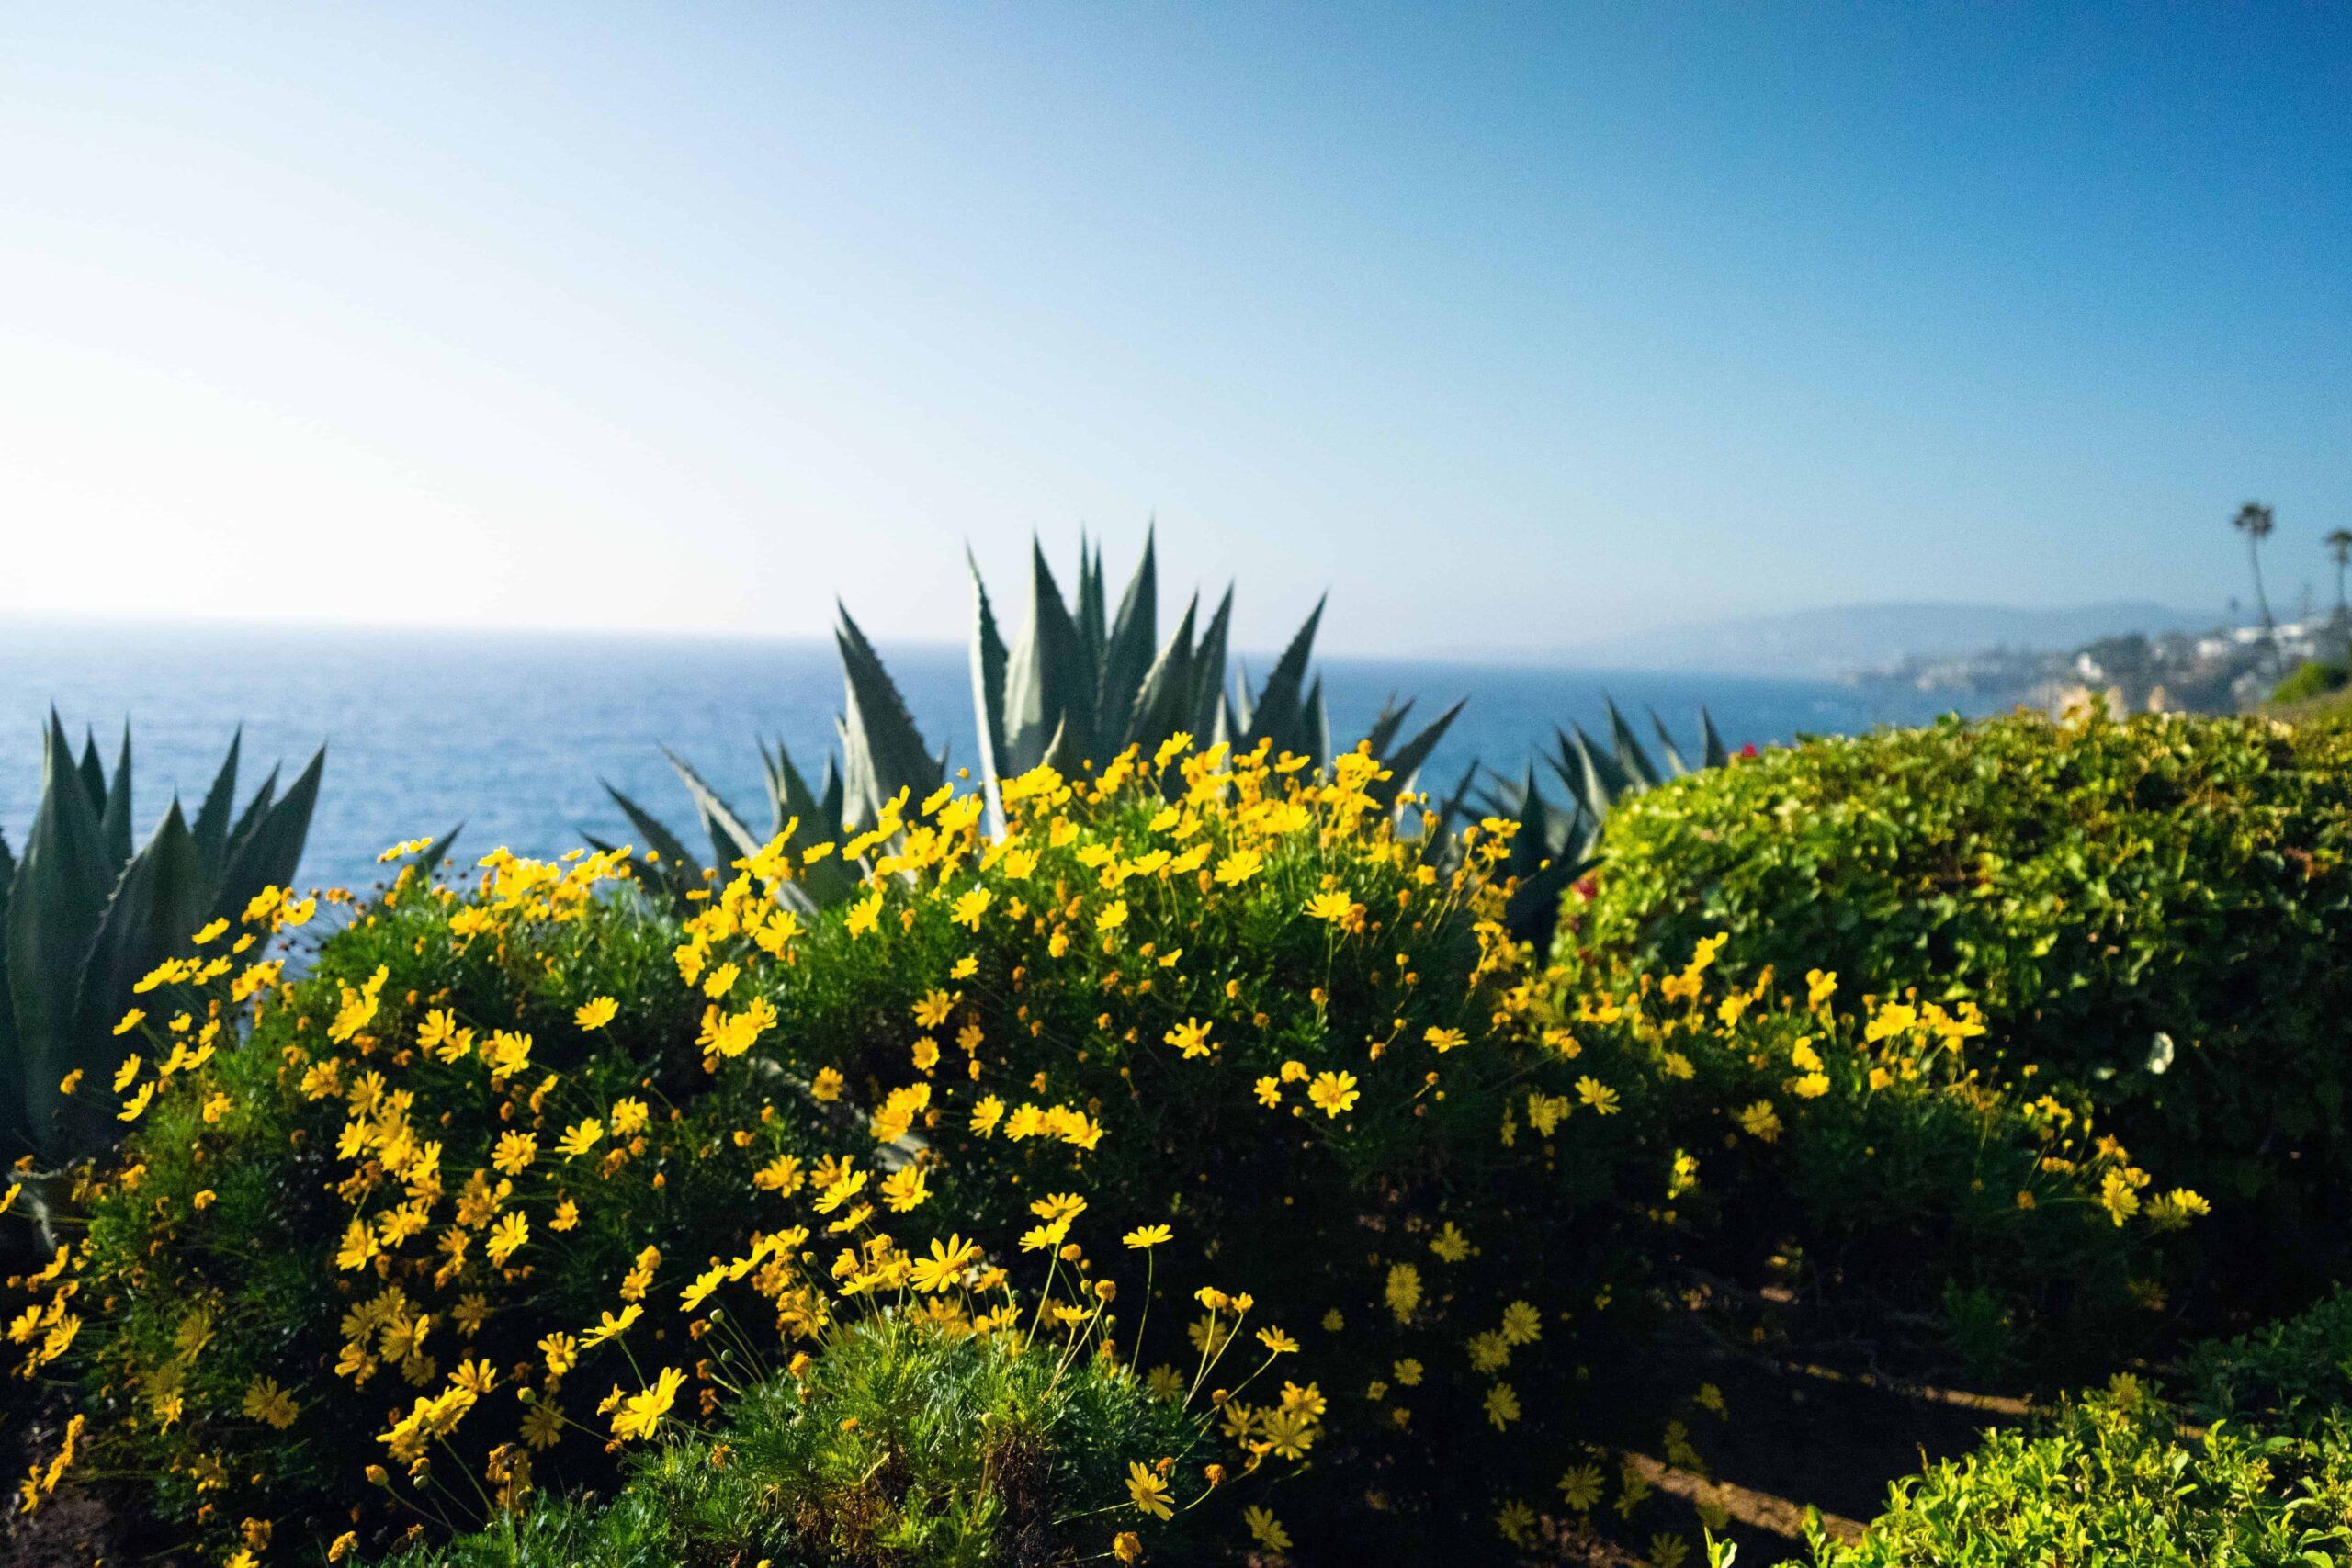 Ocean with flowers and shrubbery in the foreground in Orange, California.